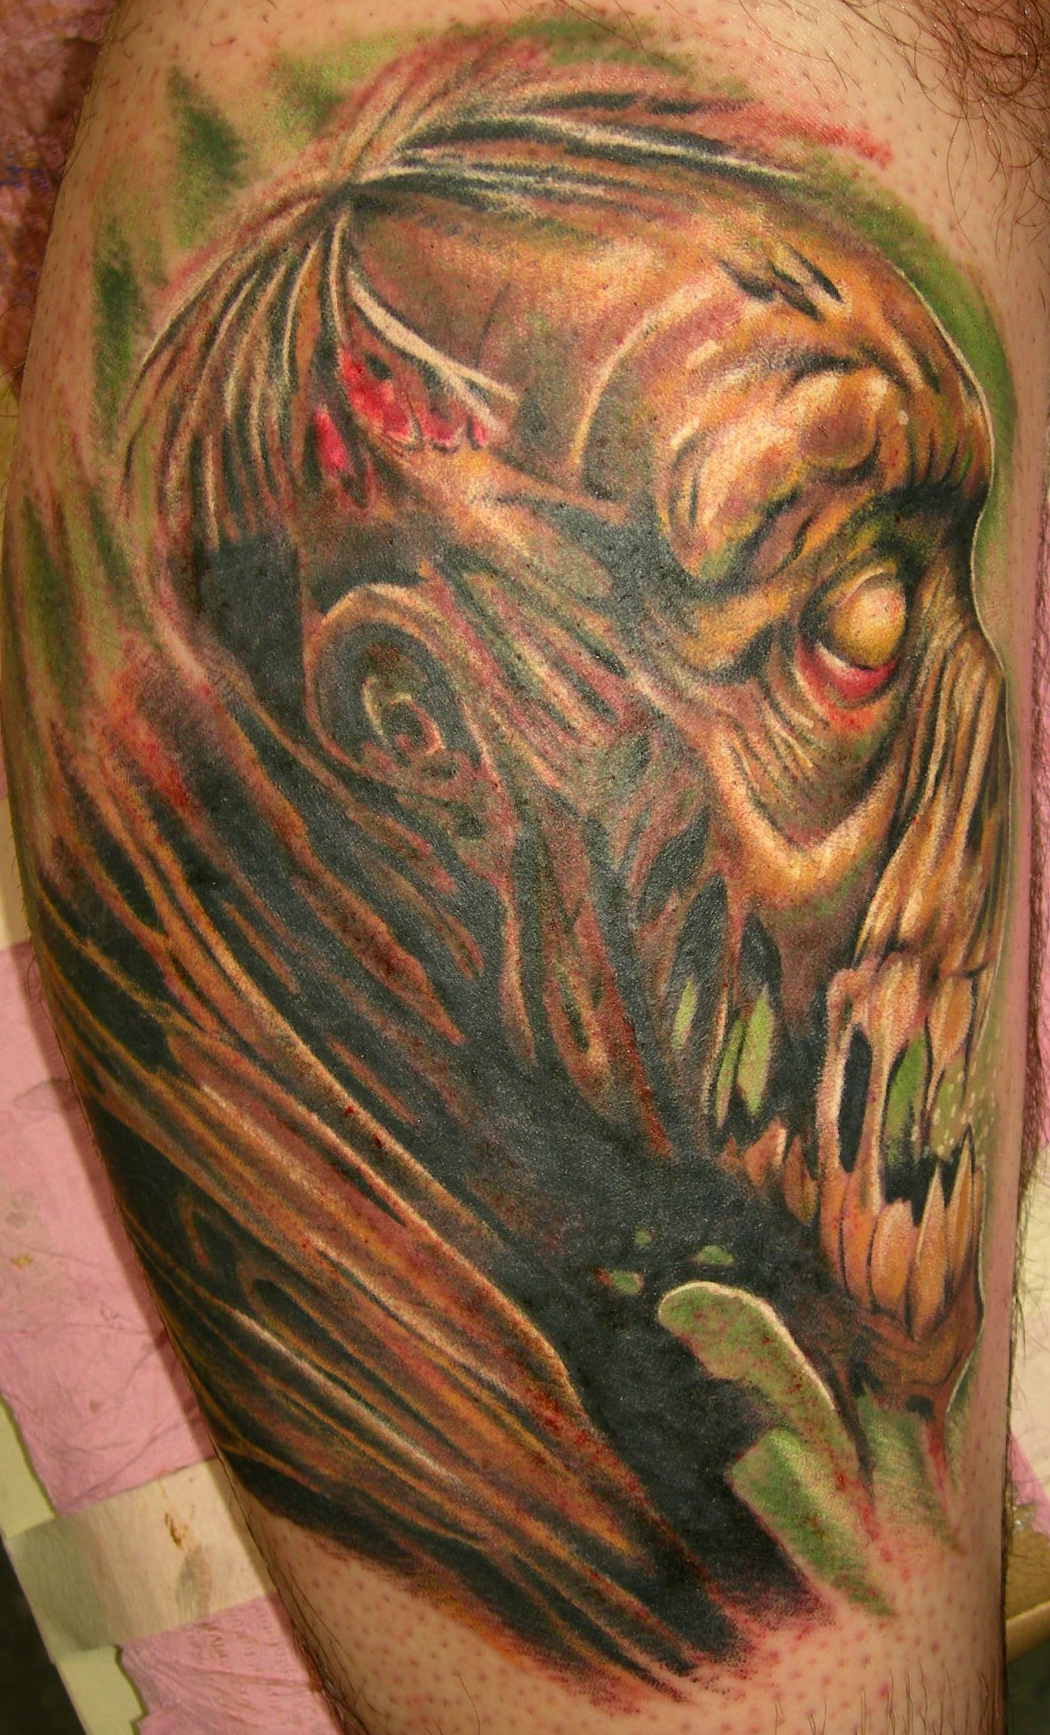 Zombie Tattoos Designs, Ideas and Meaning | Tattoos For You